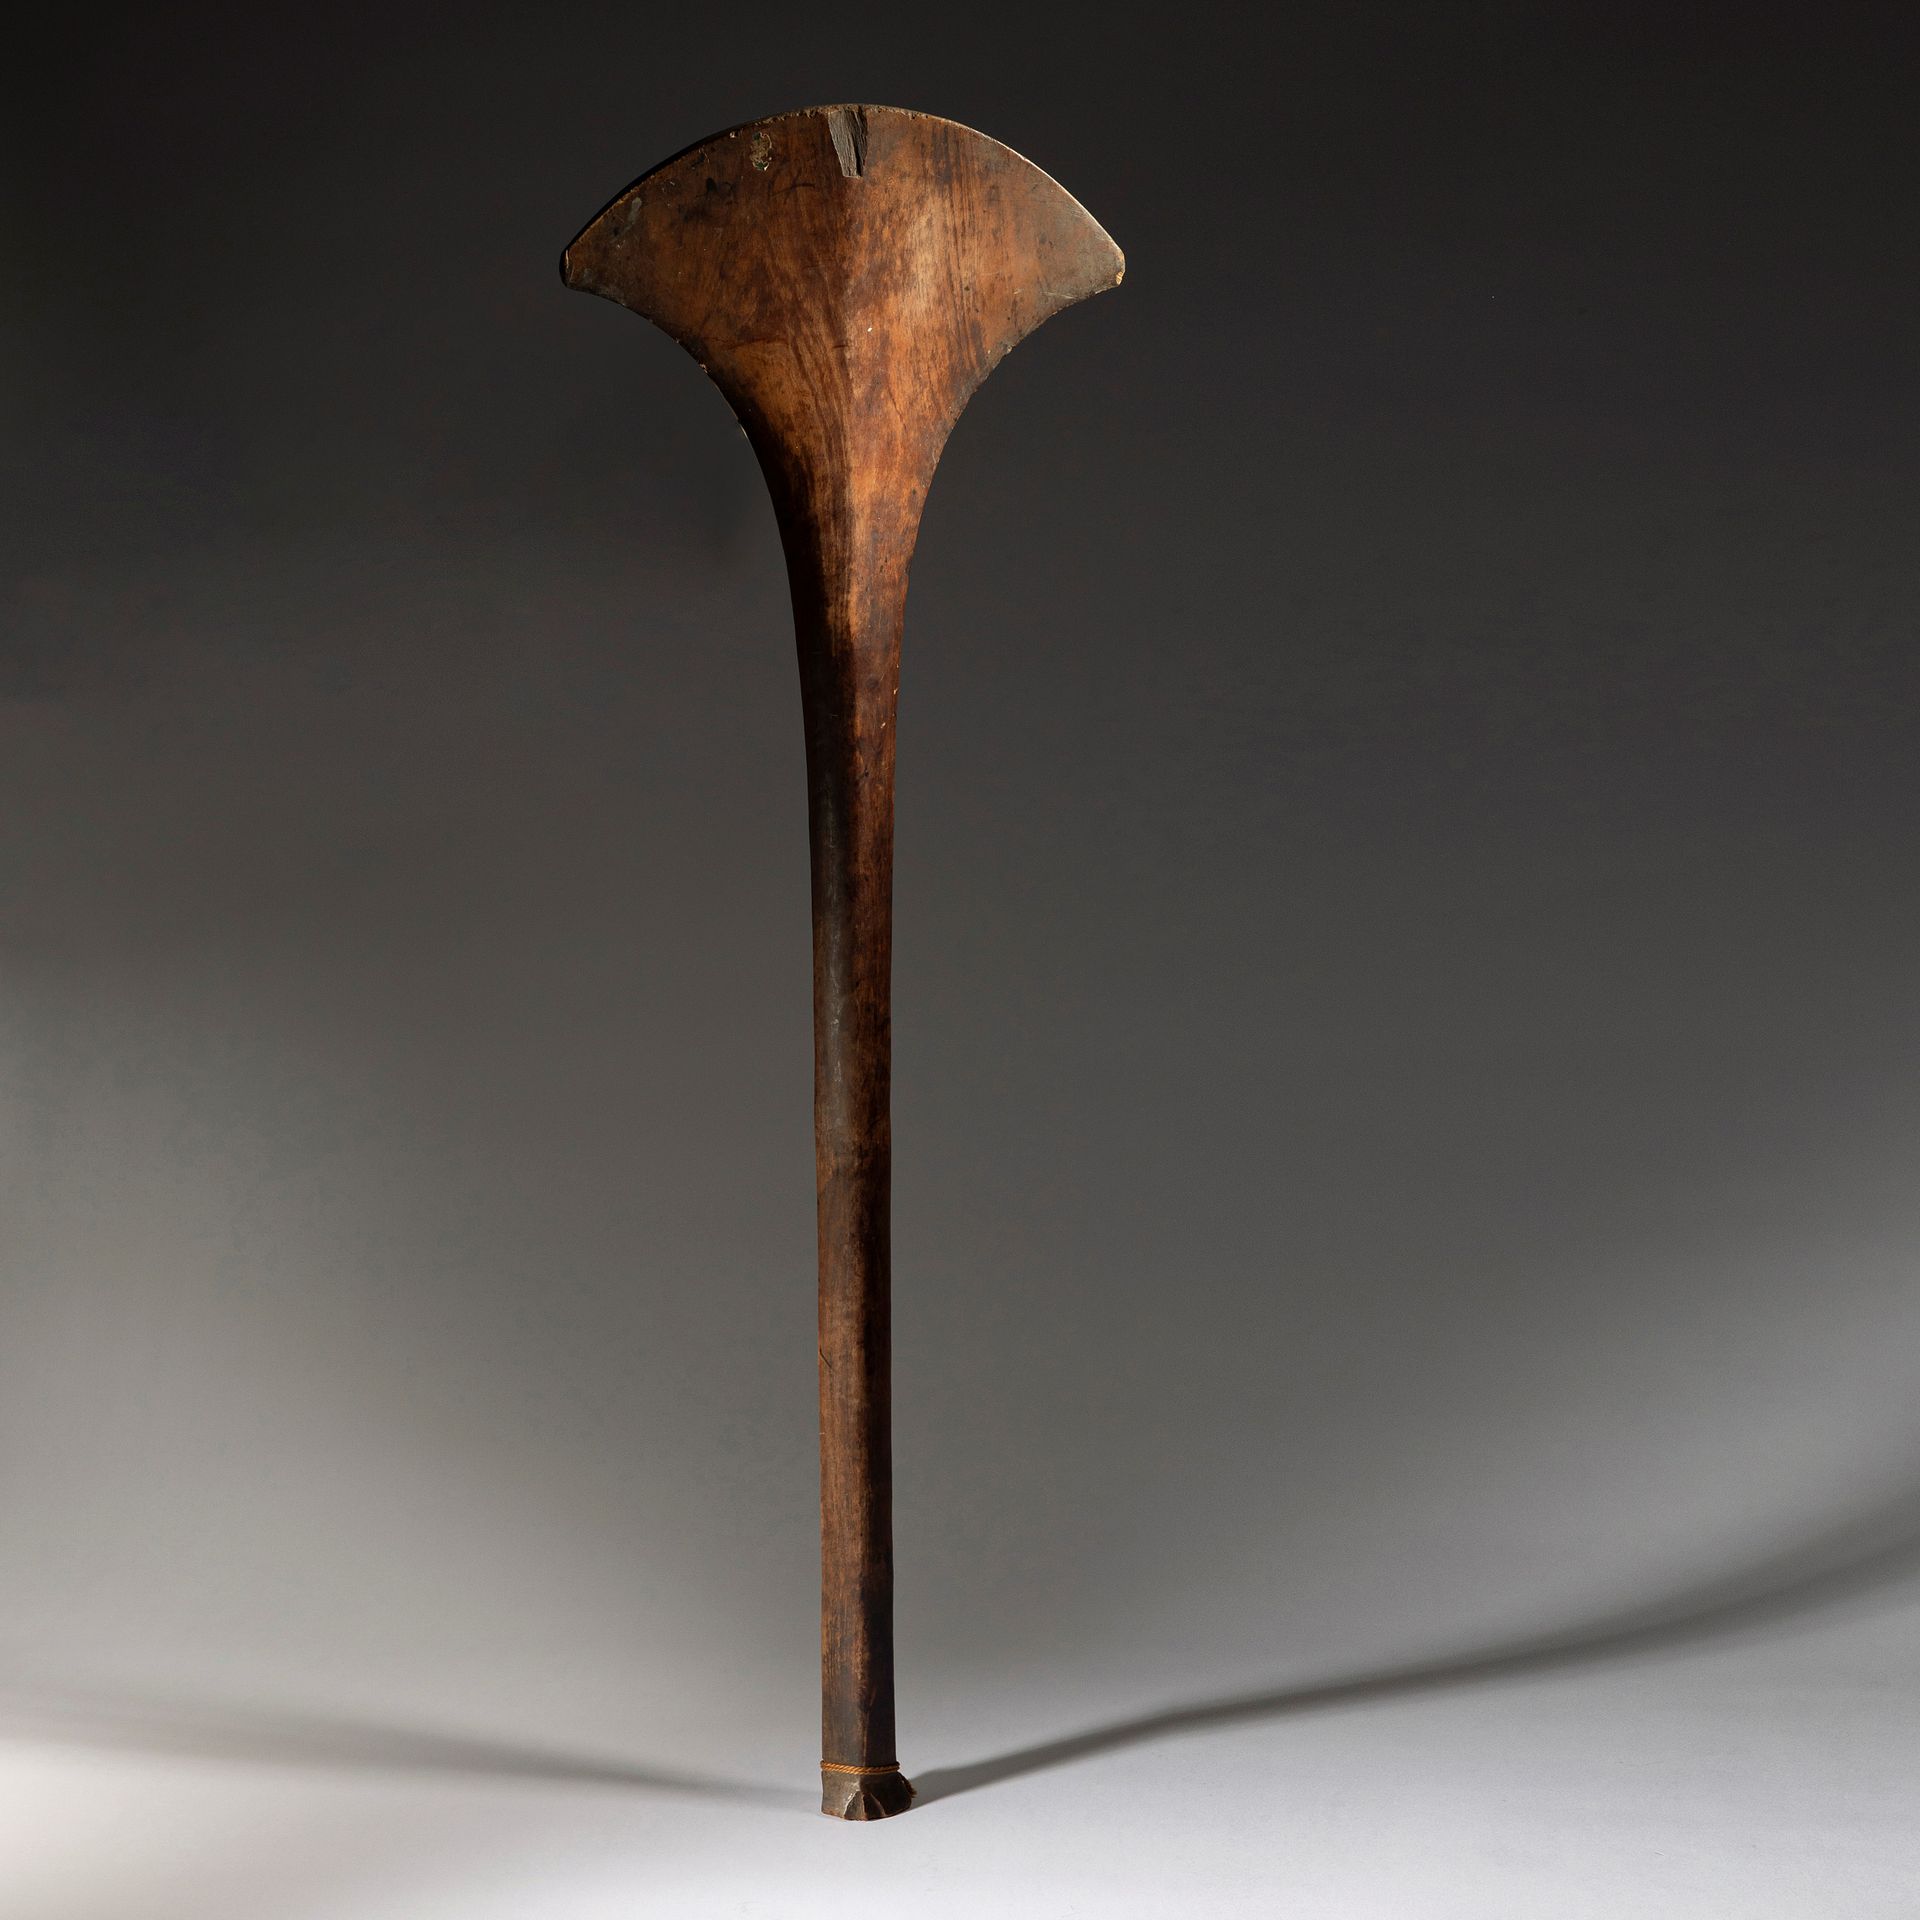 Null A set of two clubs including an ancient fa'alautalinga club whose fan shape&hellip;